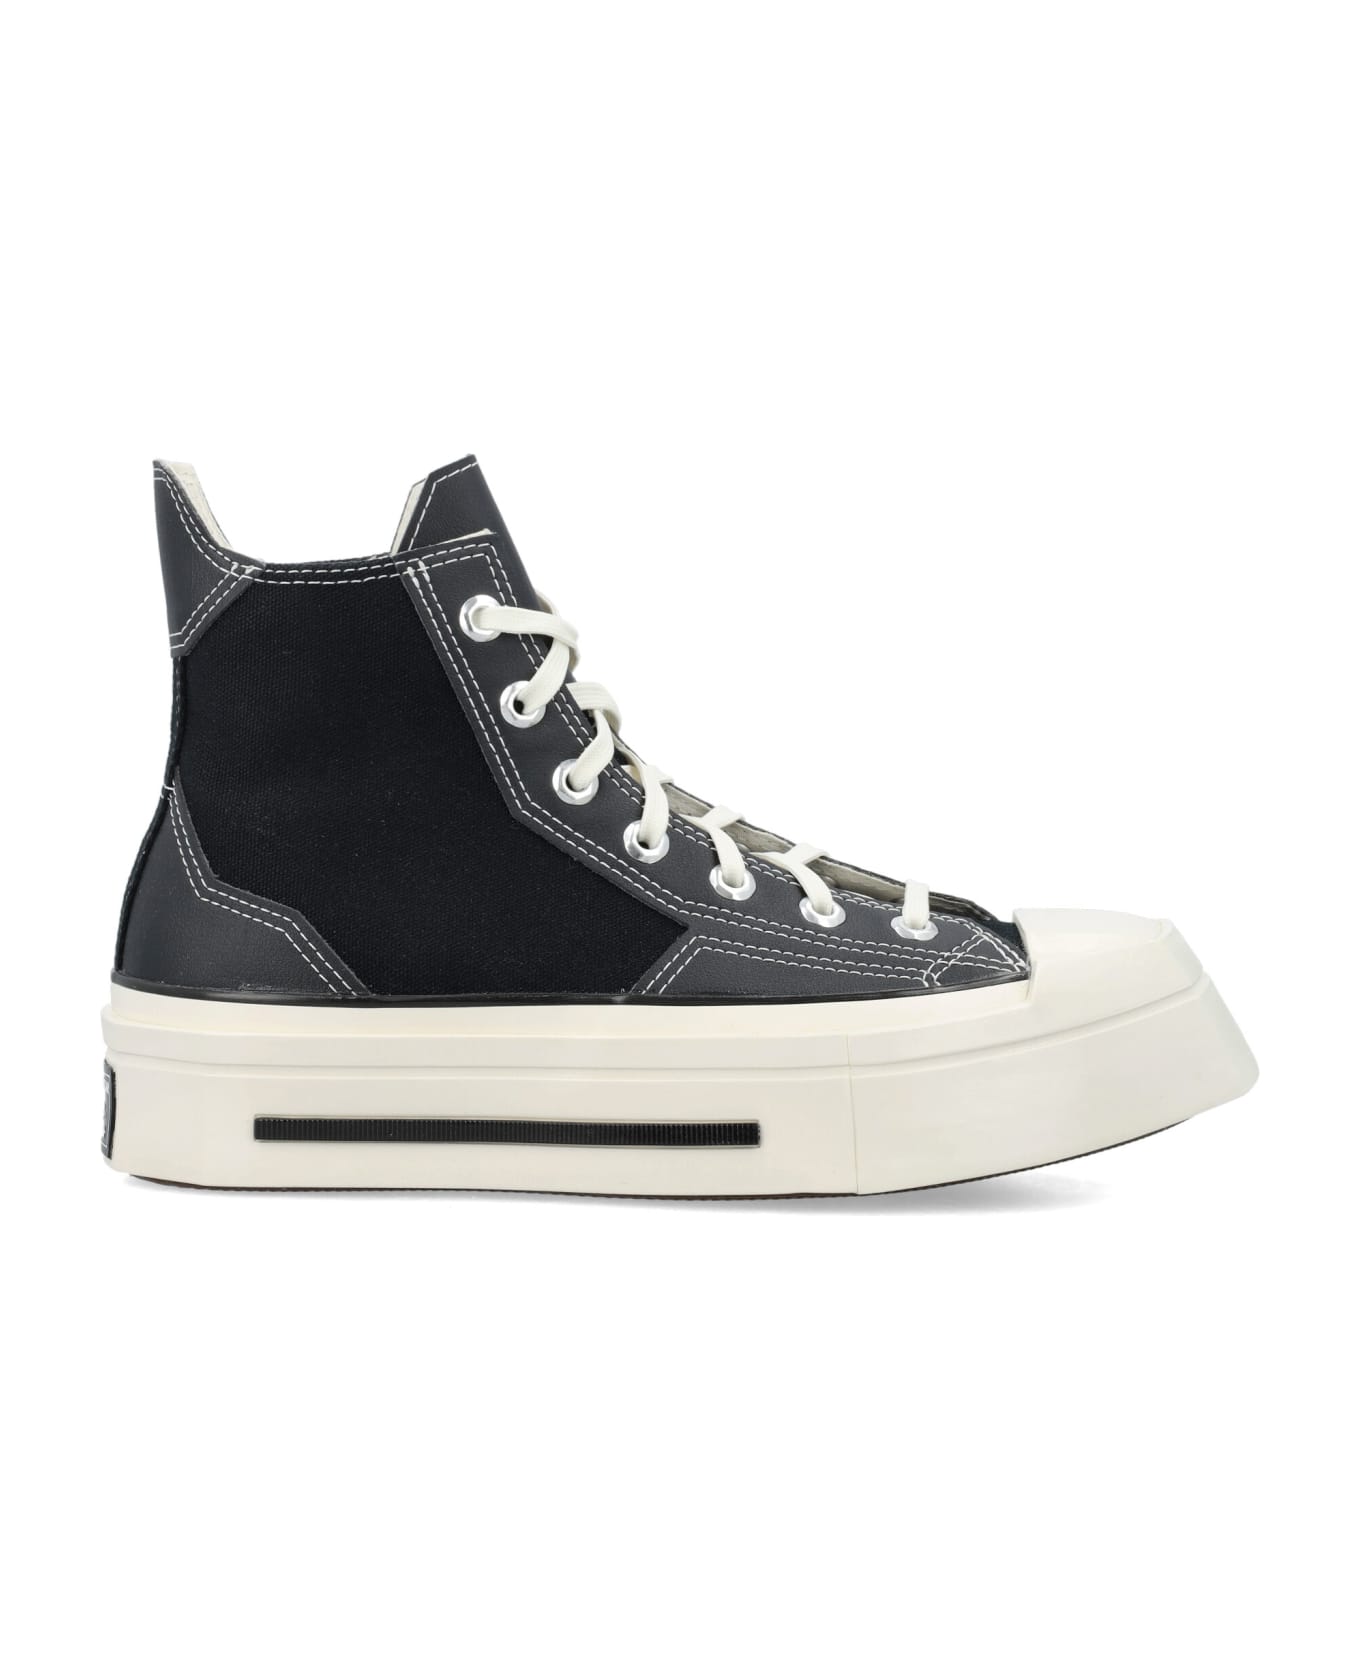 Converse Chuck 70 Deluxe Squared Hi Sneakers - BLACK